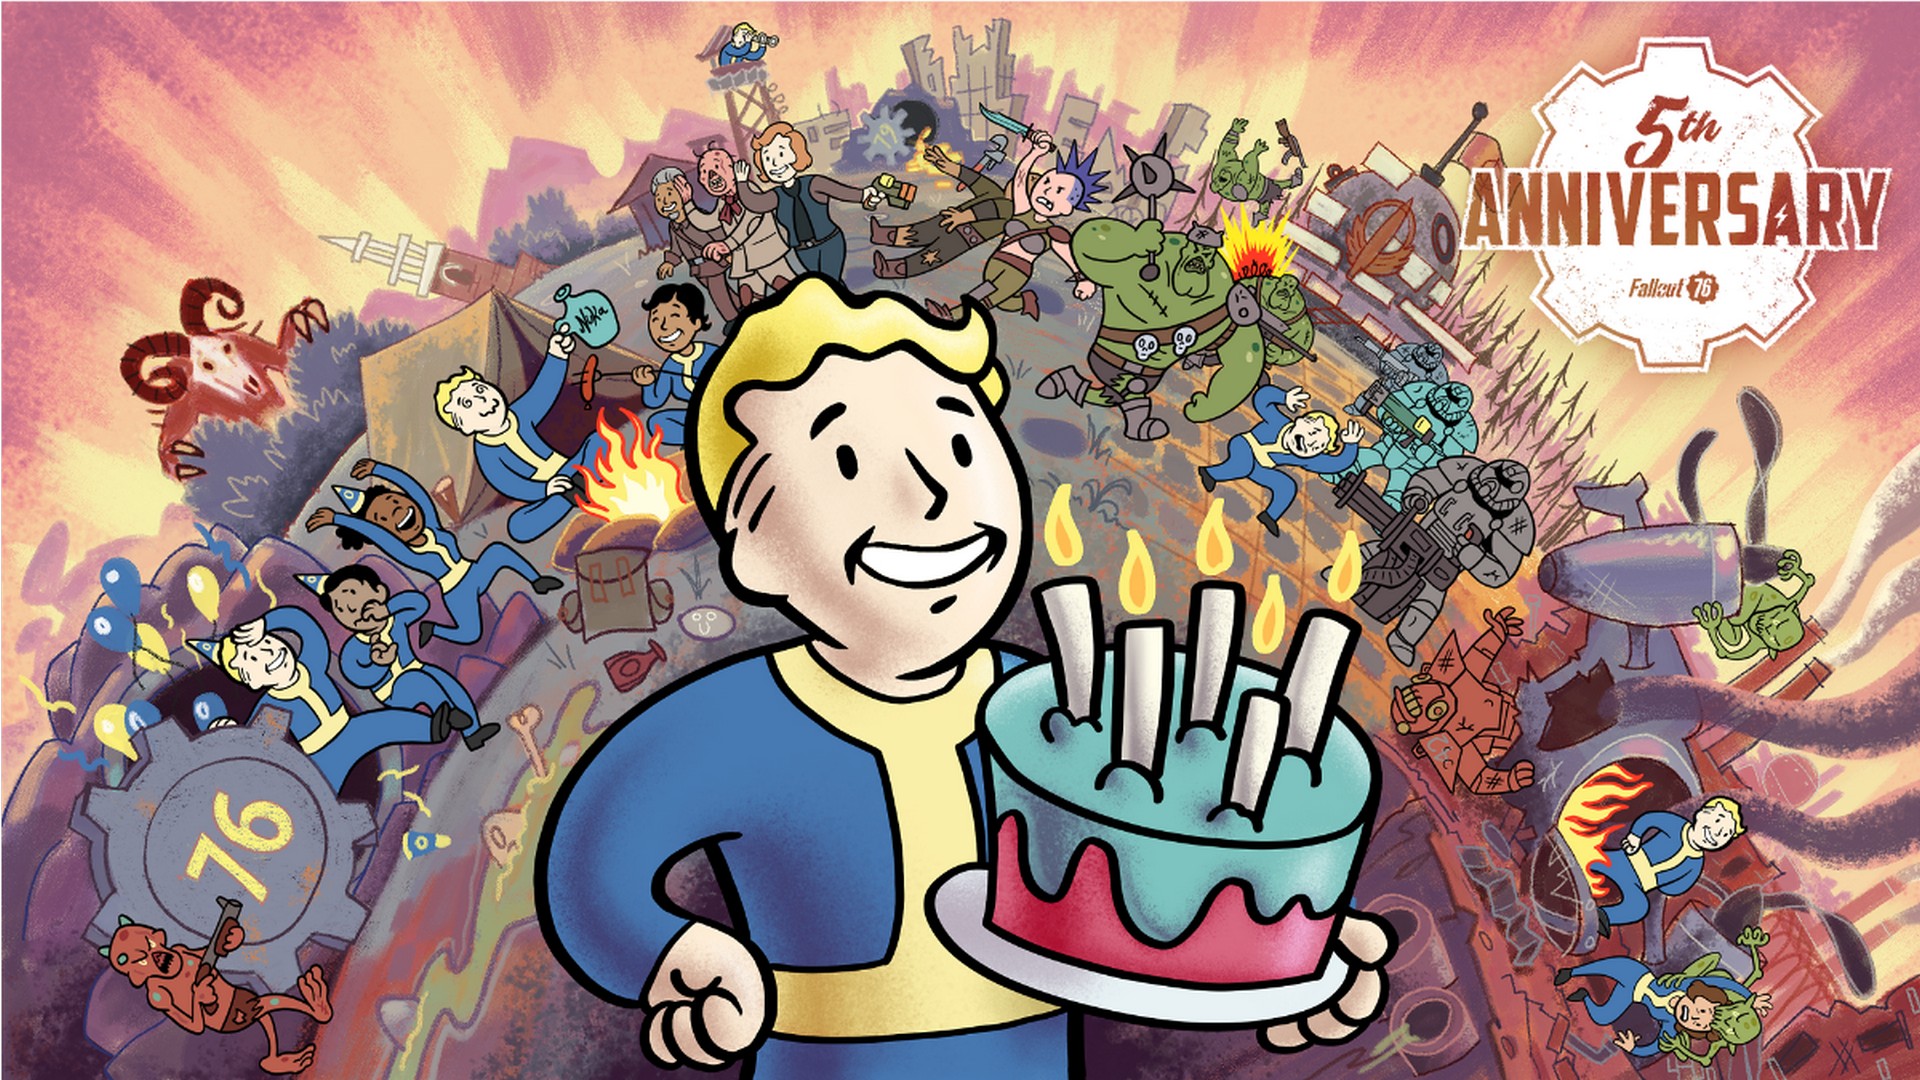 Fallout 76 Celebrates Fifth Anniversary With Festive In-Game Events & Rewards